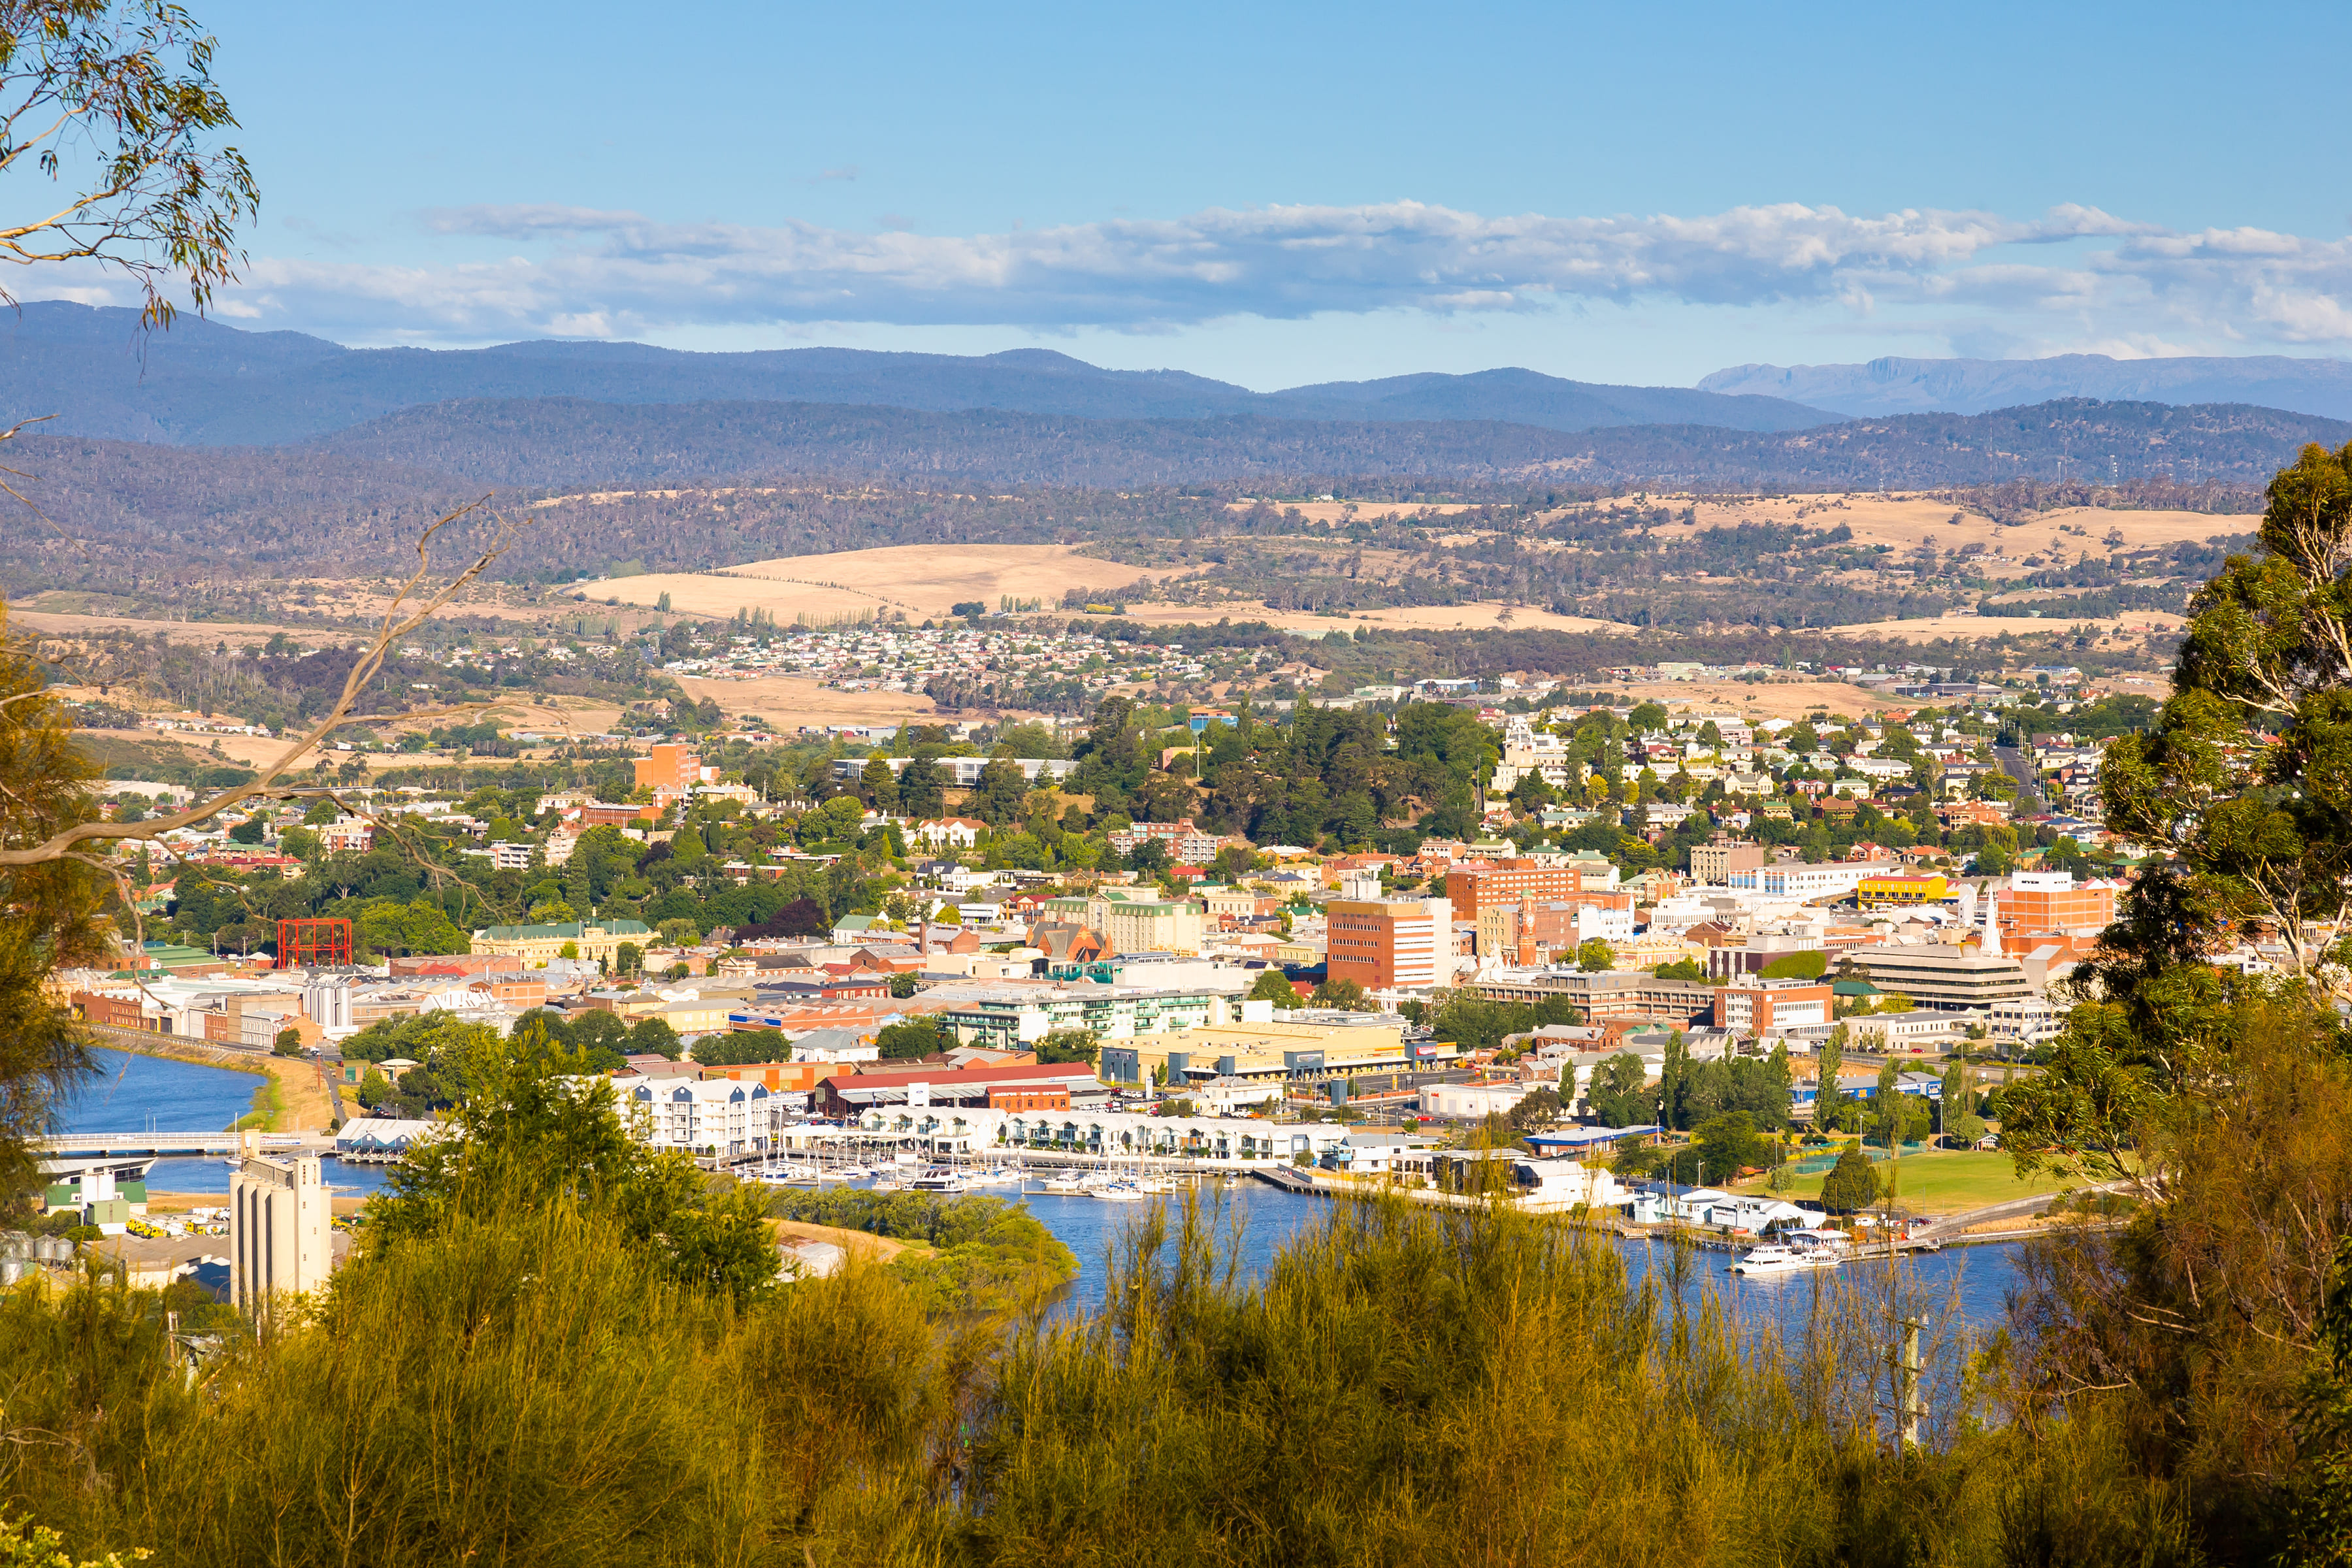 Picturesque views are what will greet you when you move from Adelaide to Tasmania with Richard Mitchell Removalists